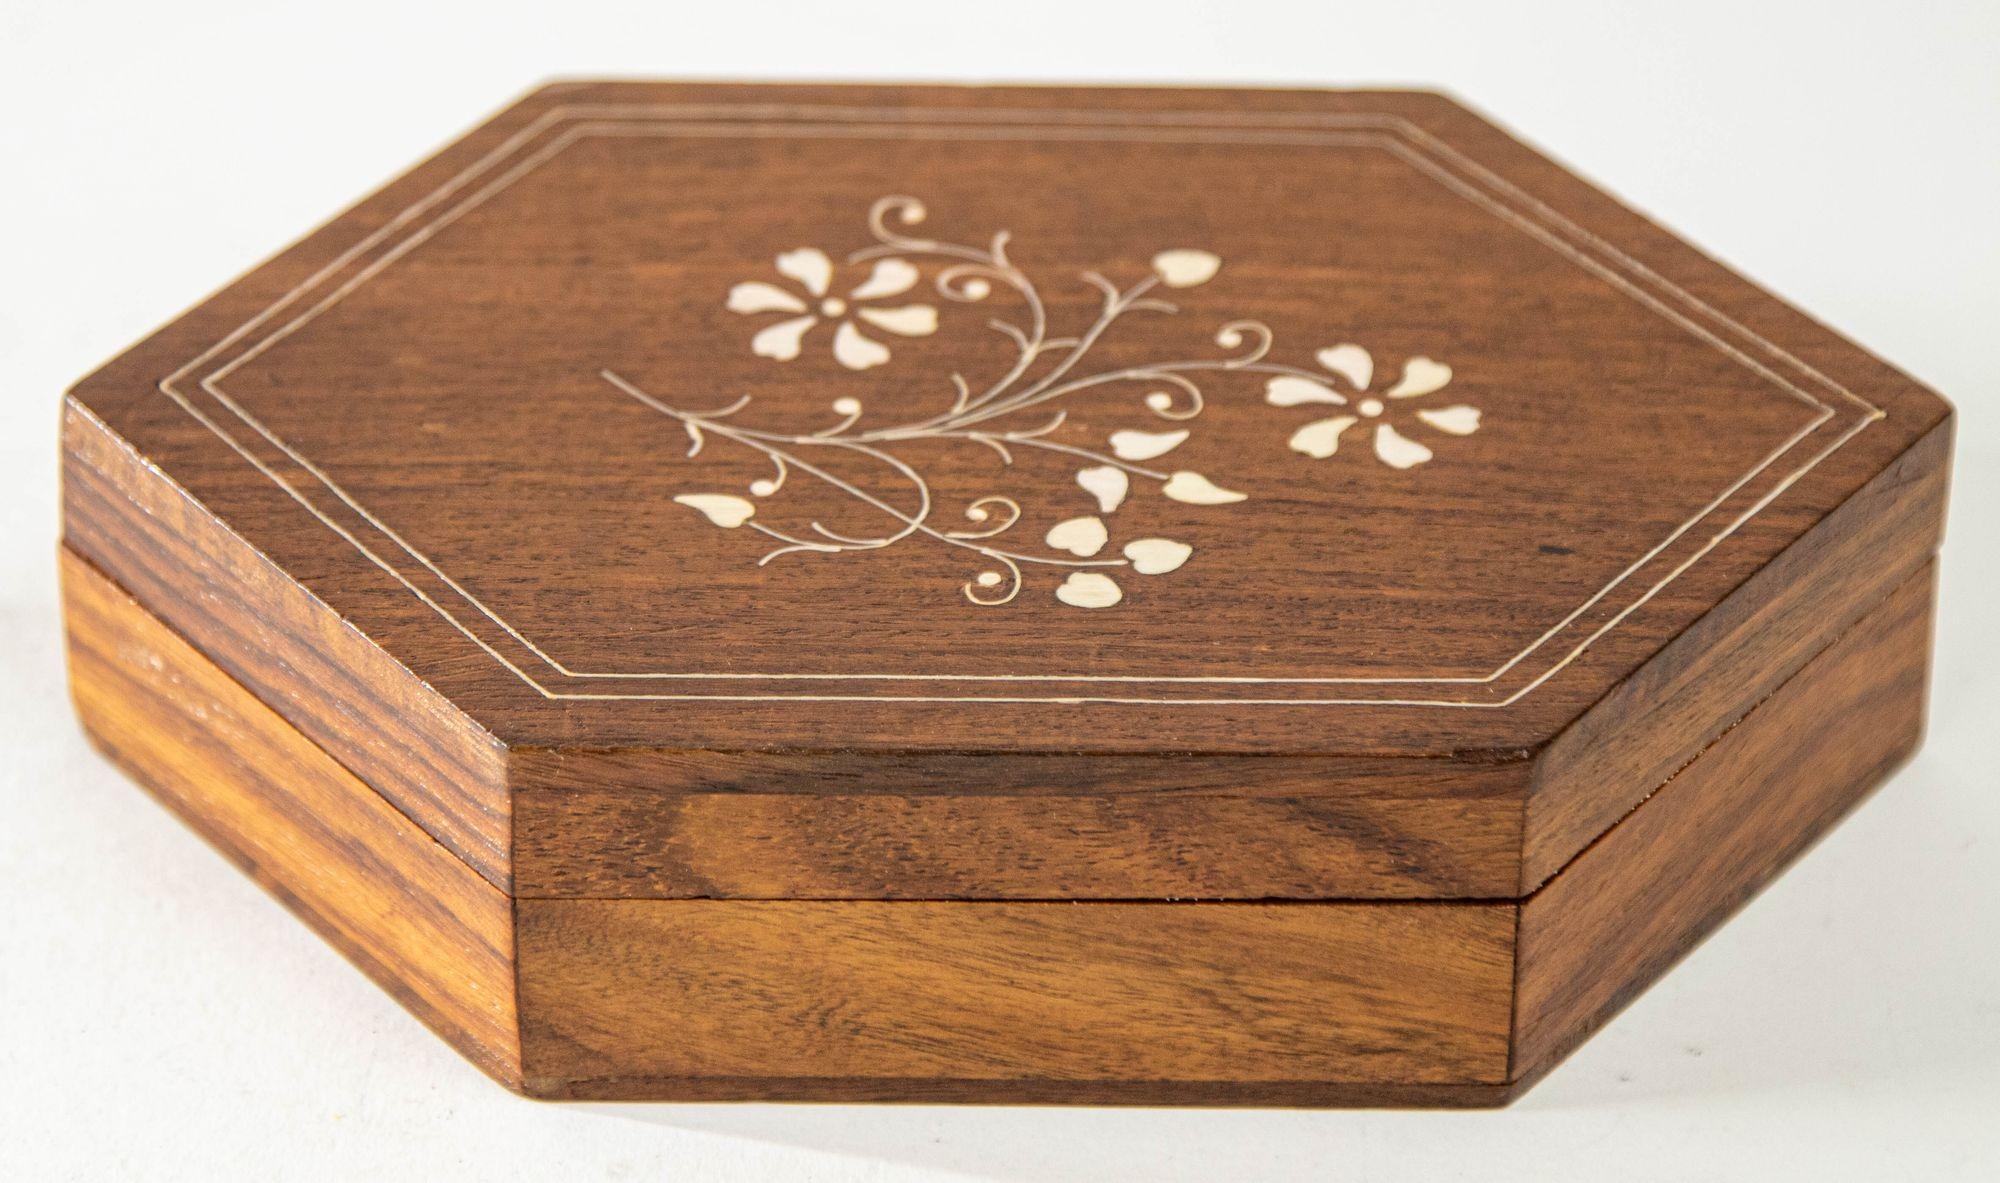 1960s Handcrafted Bone Inlaid Trinket Moroccan Wood Trinket Box.
Handmade artisanal mid century inlaid trinket decorative lidded Moroccan box.
This hexagonal shaped decorative box has an intricate floral inlay to the top lid. 
Hand made in Morocco